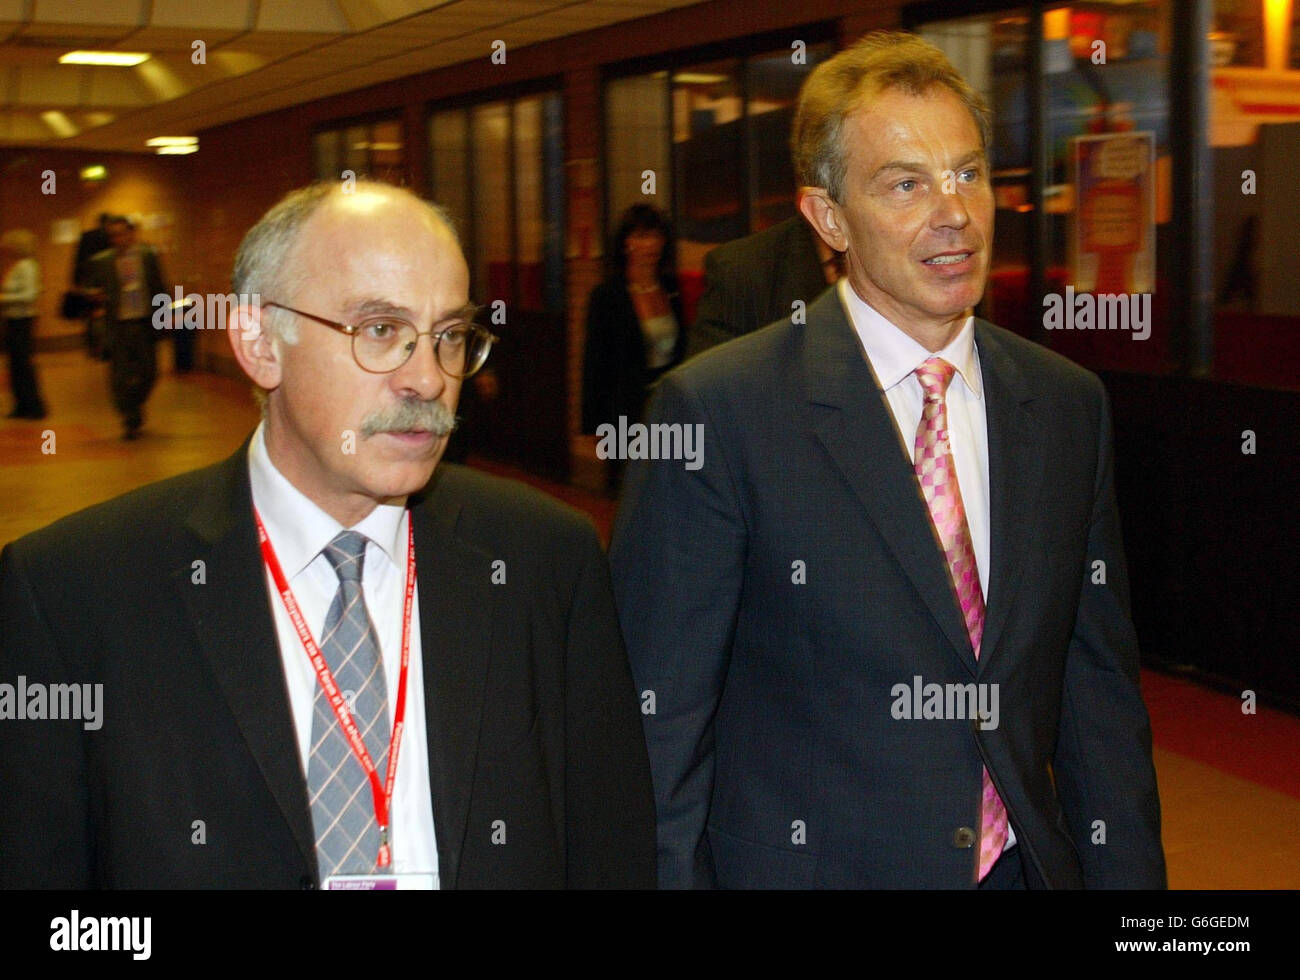 Prime Minister Tony Blair leaves the health debate with his director of communications David Hill at the Labour Party Conference in Bournemouth. Mr Blair suffered an embarrassing defeat on foundation hospitals today when delegates voted to scrap his flagship policy at the conference. The Prime Minister will push ahead with the controversial plan to give greater freedom to top hospitals, but the defeat will give fresh ammunition to Labour MPs fighting the reforms in the House of Commons. Stock Photo